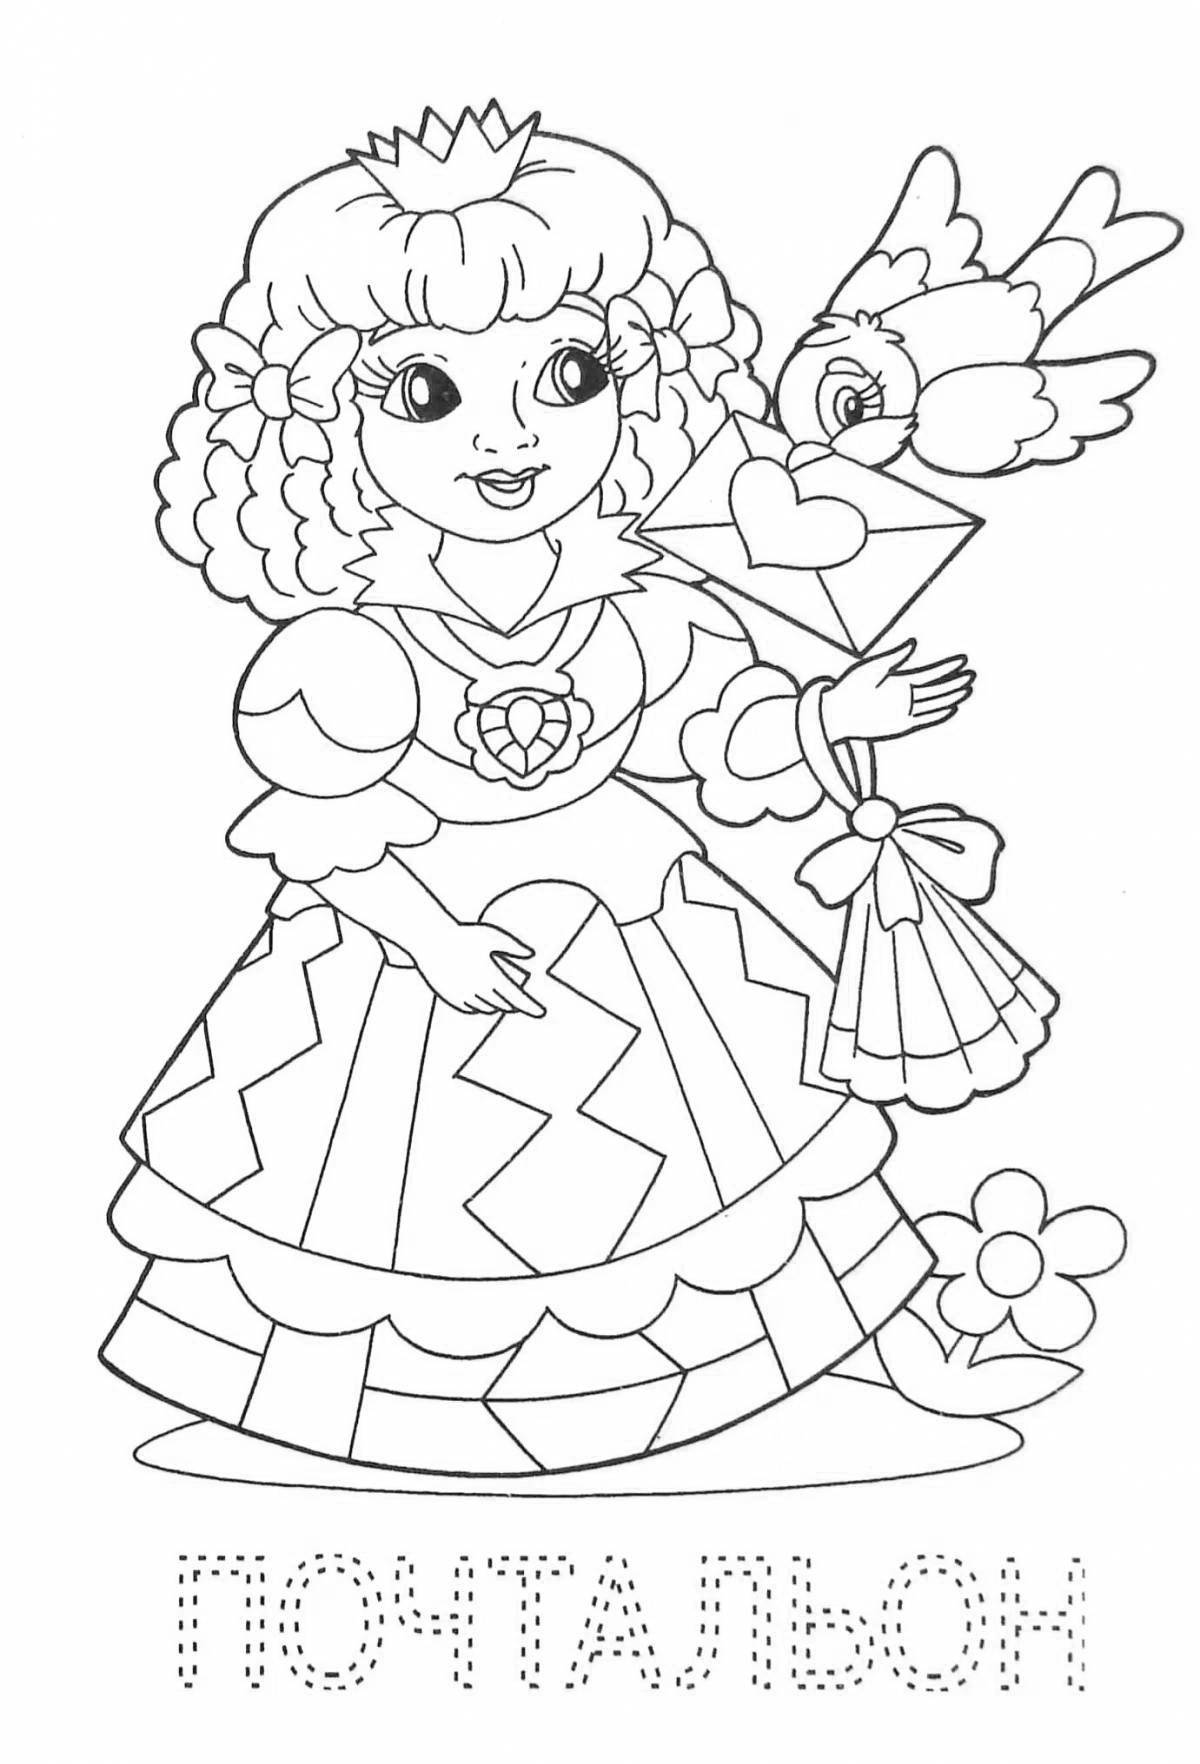 Sparkling doll coloring book for children 5-6 years old